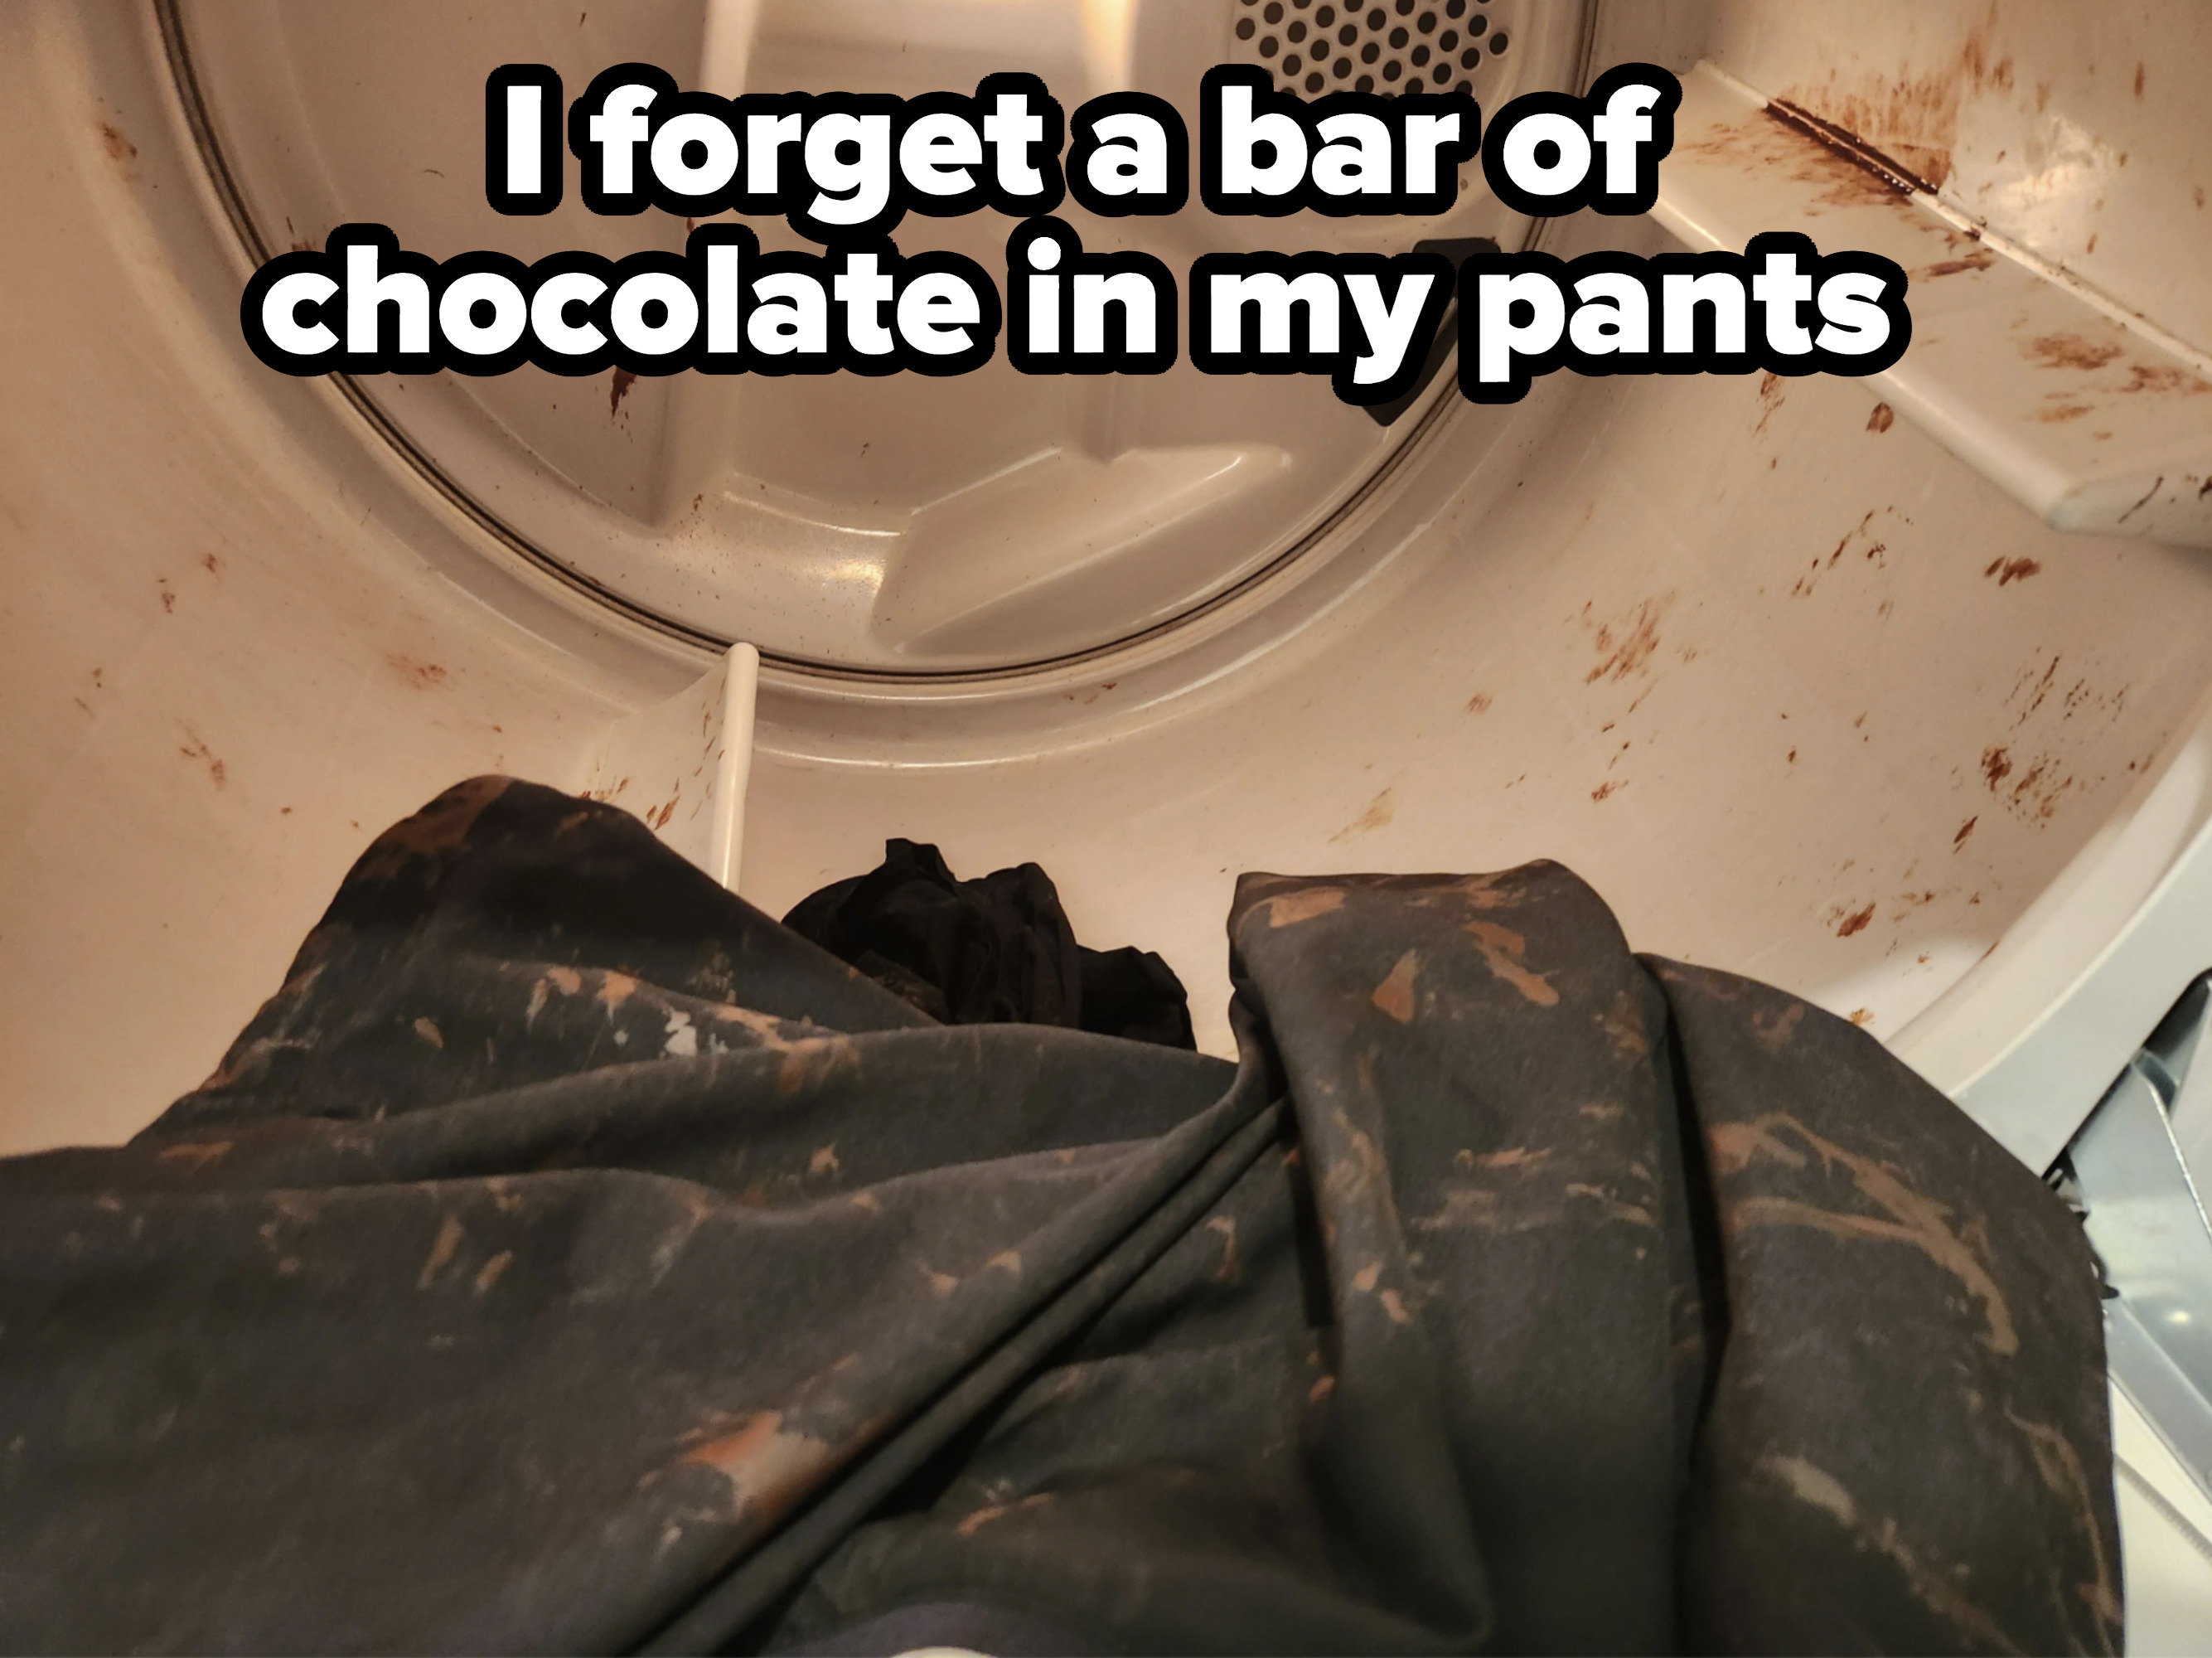 Clothes covered in chocolate